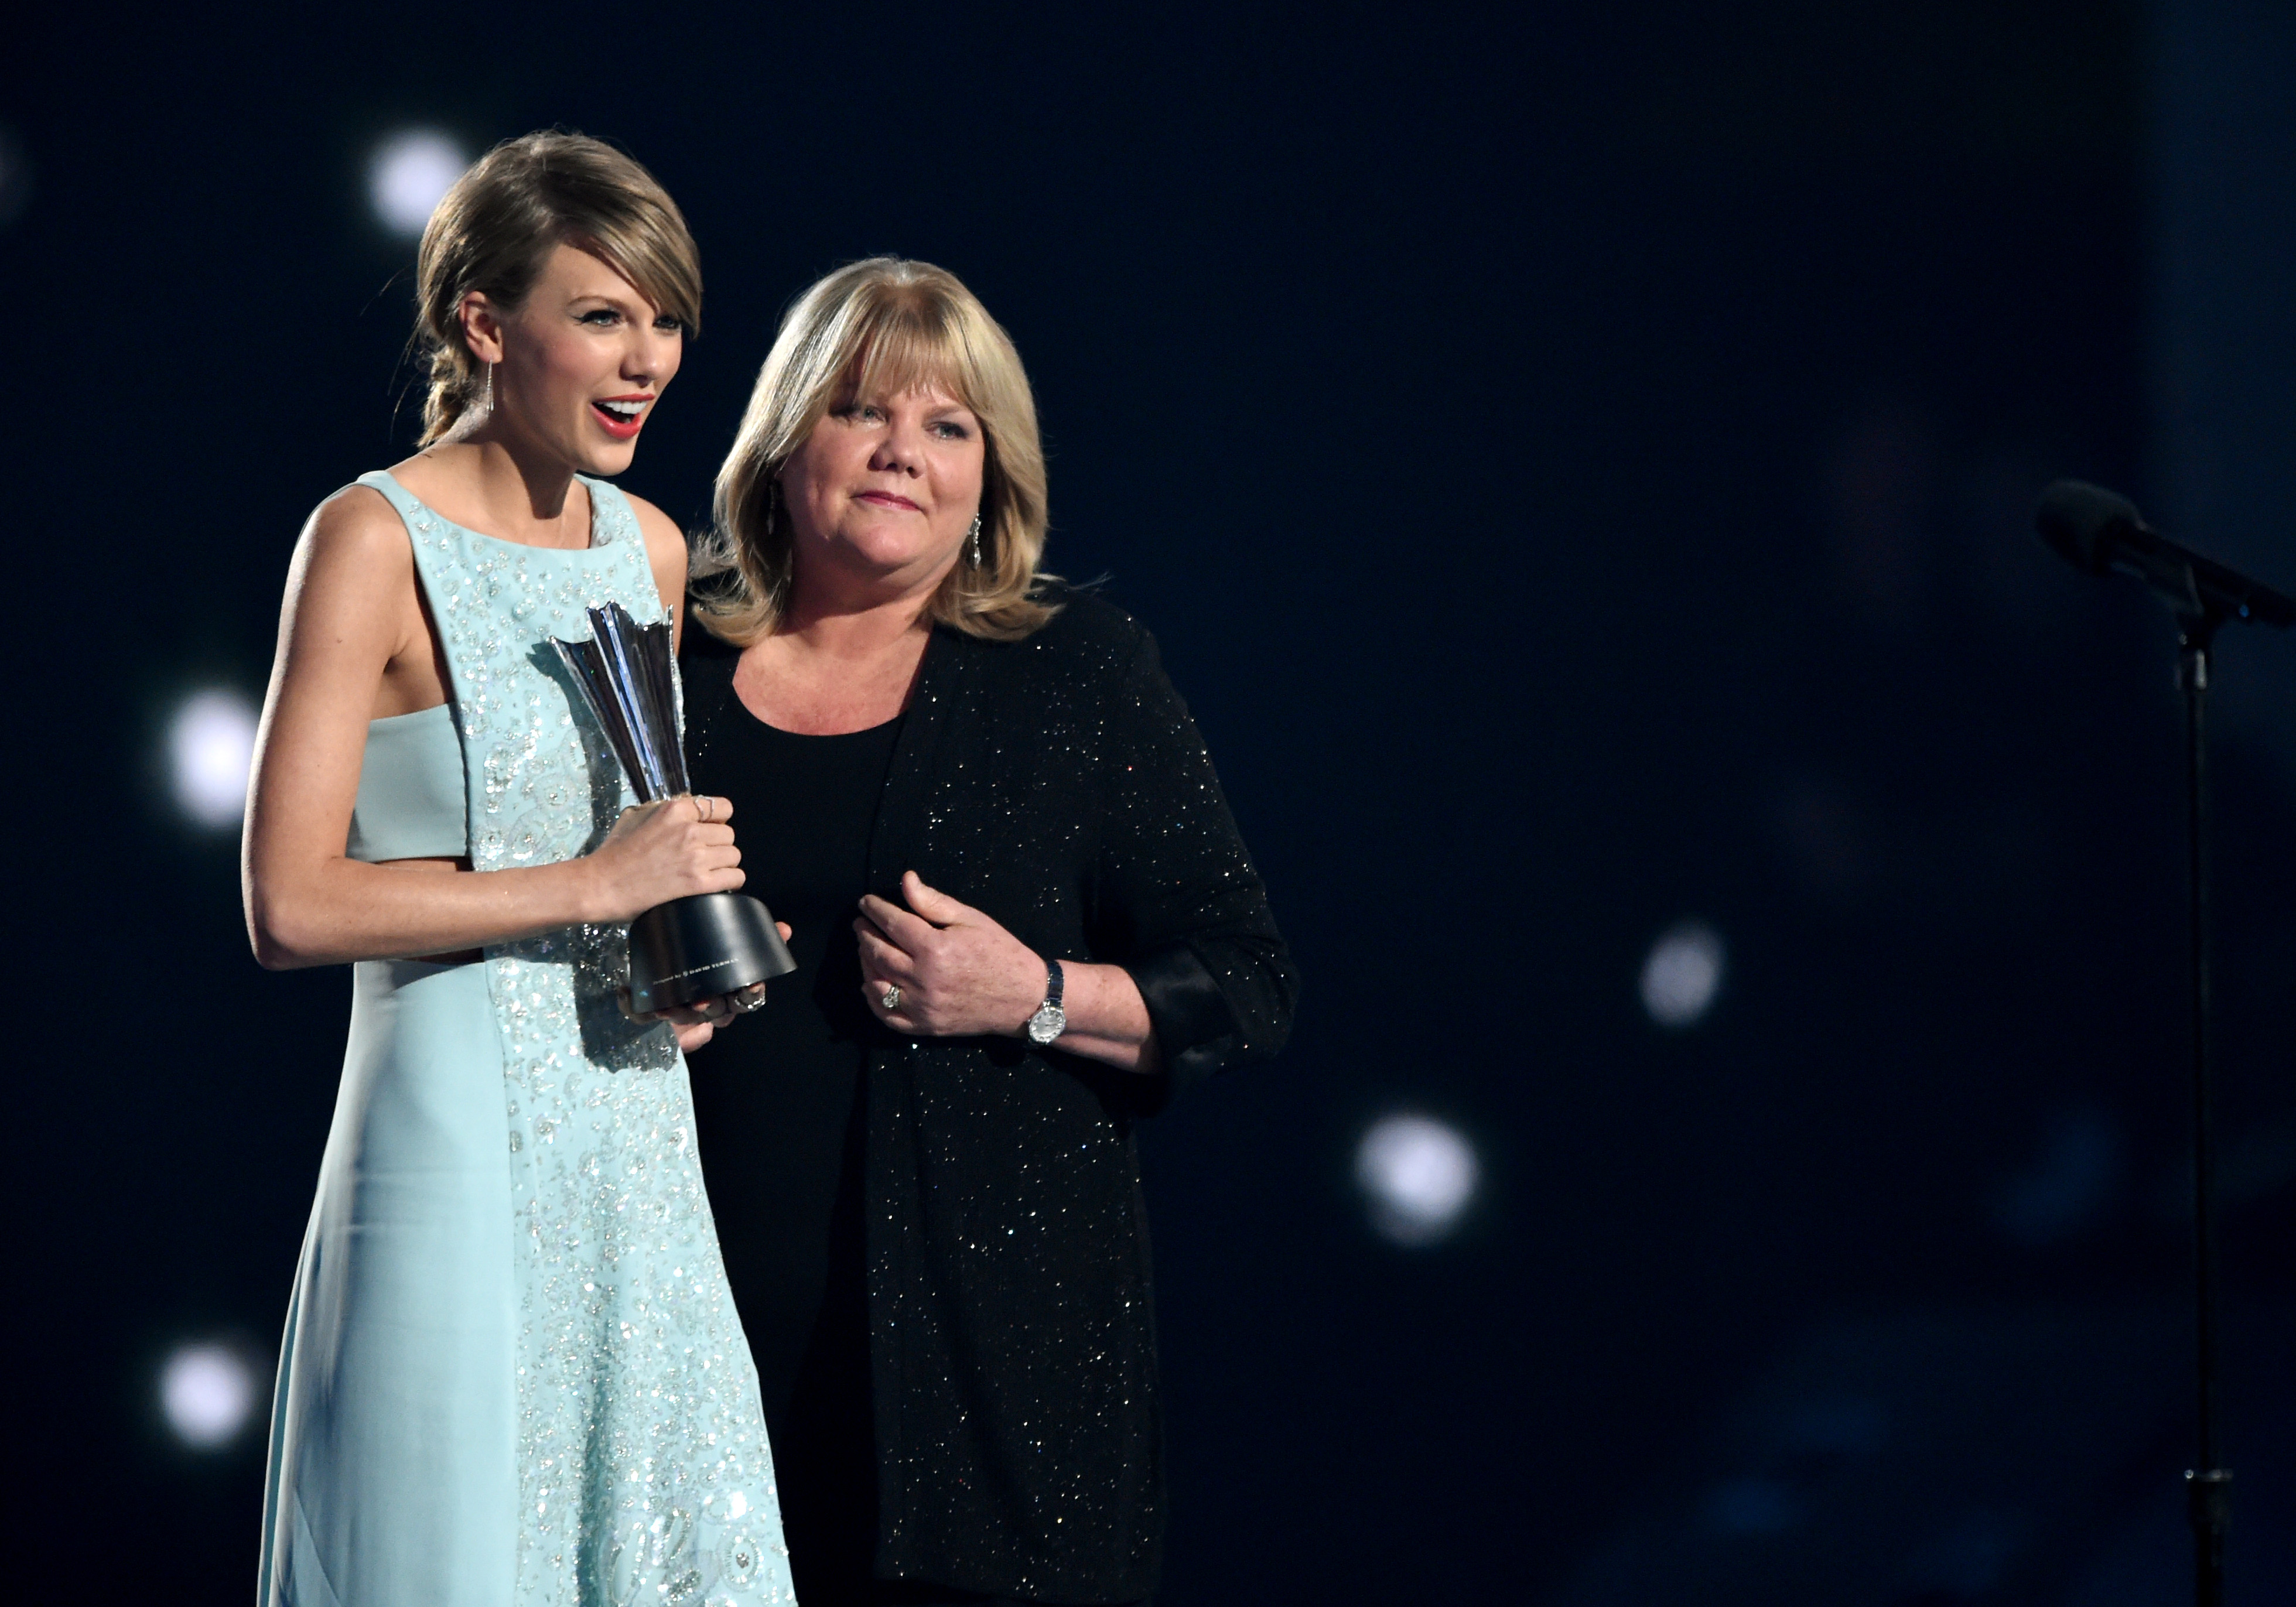 Honoree Taylor Swift accepts the Milestone Award from Andrea Swift onstage during the 50th Academy Of Country Music Awards at AT&T Stadium on April 19, 2015 in Arlington, Texas. (Cooper Neill—Getty Images)